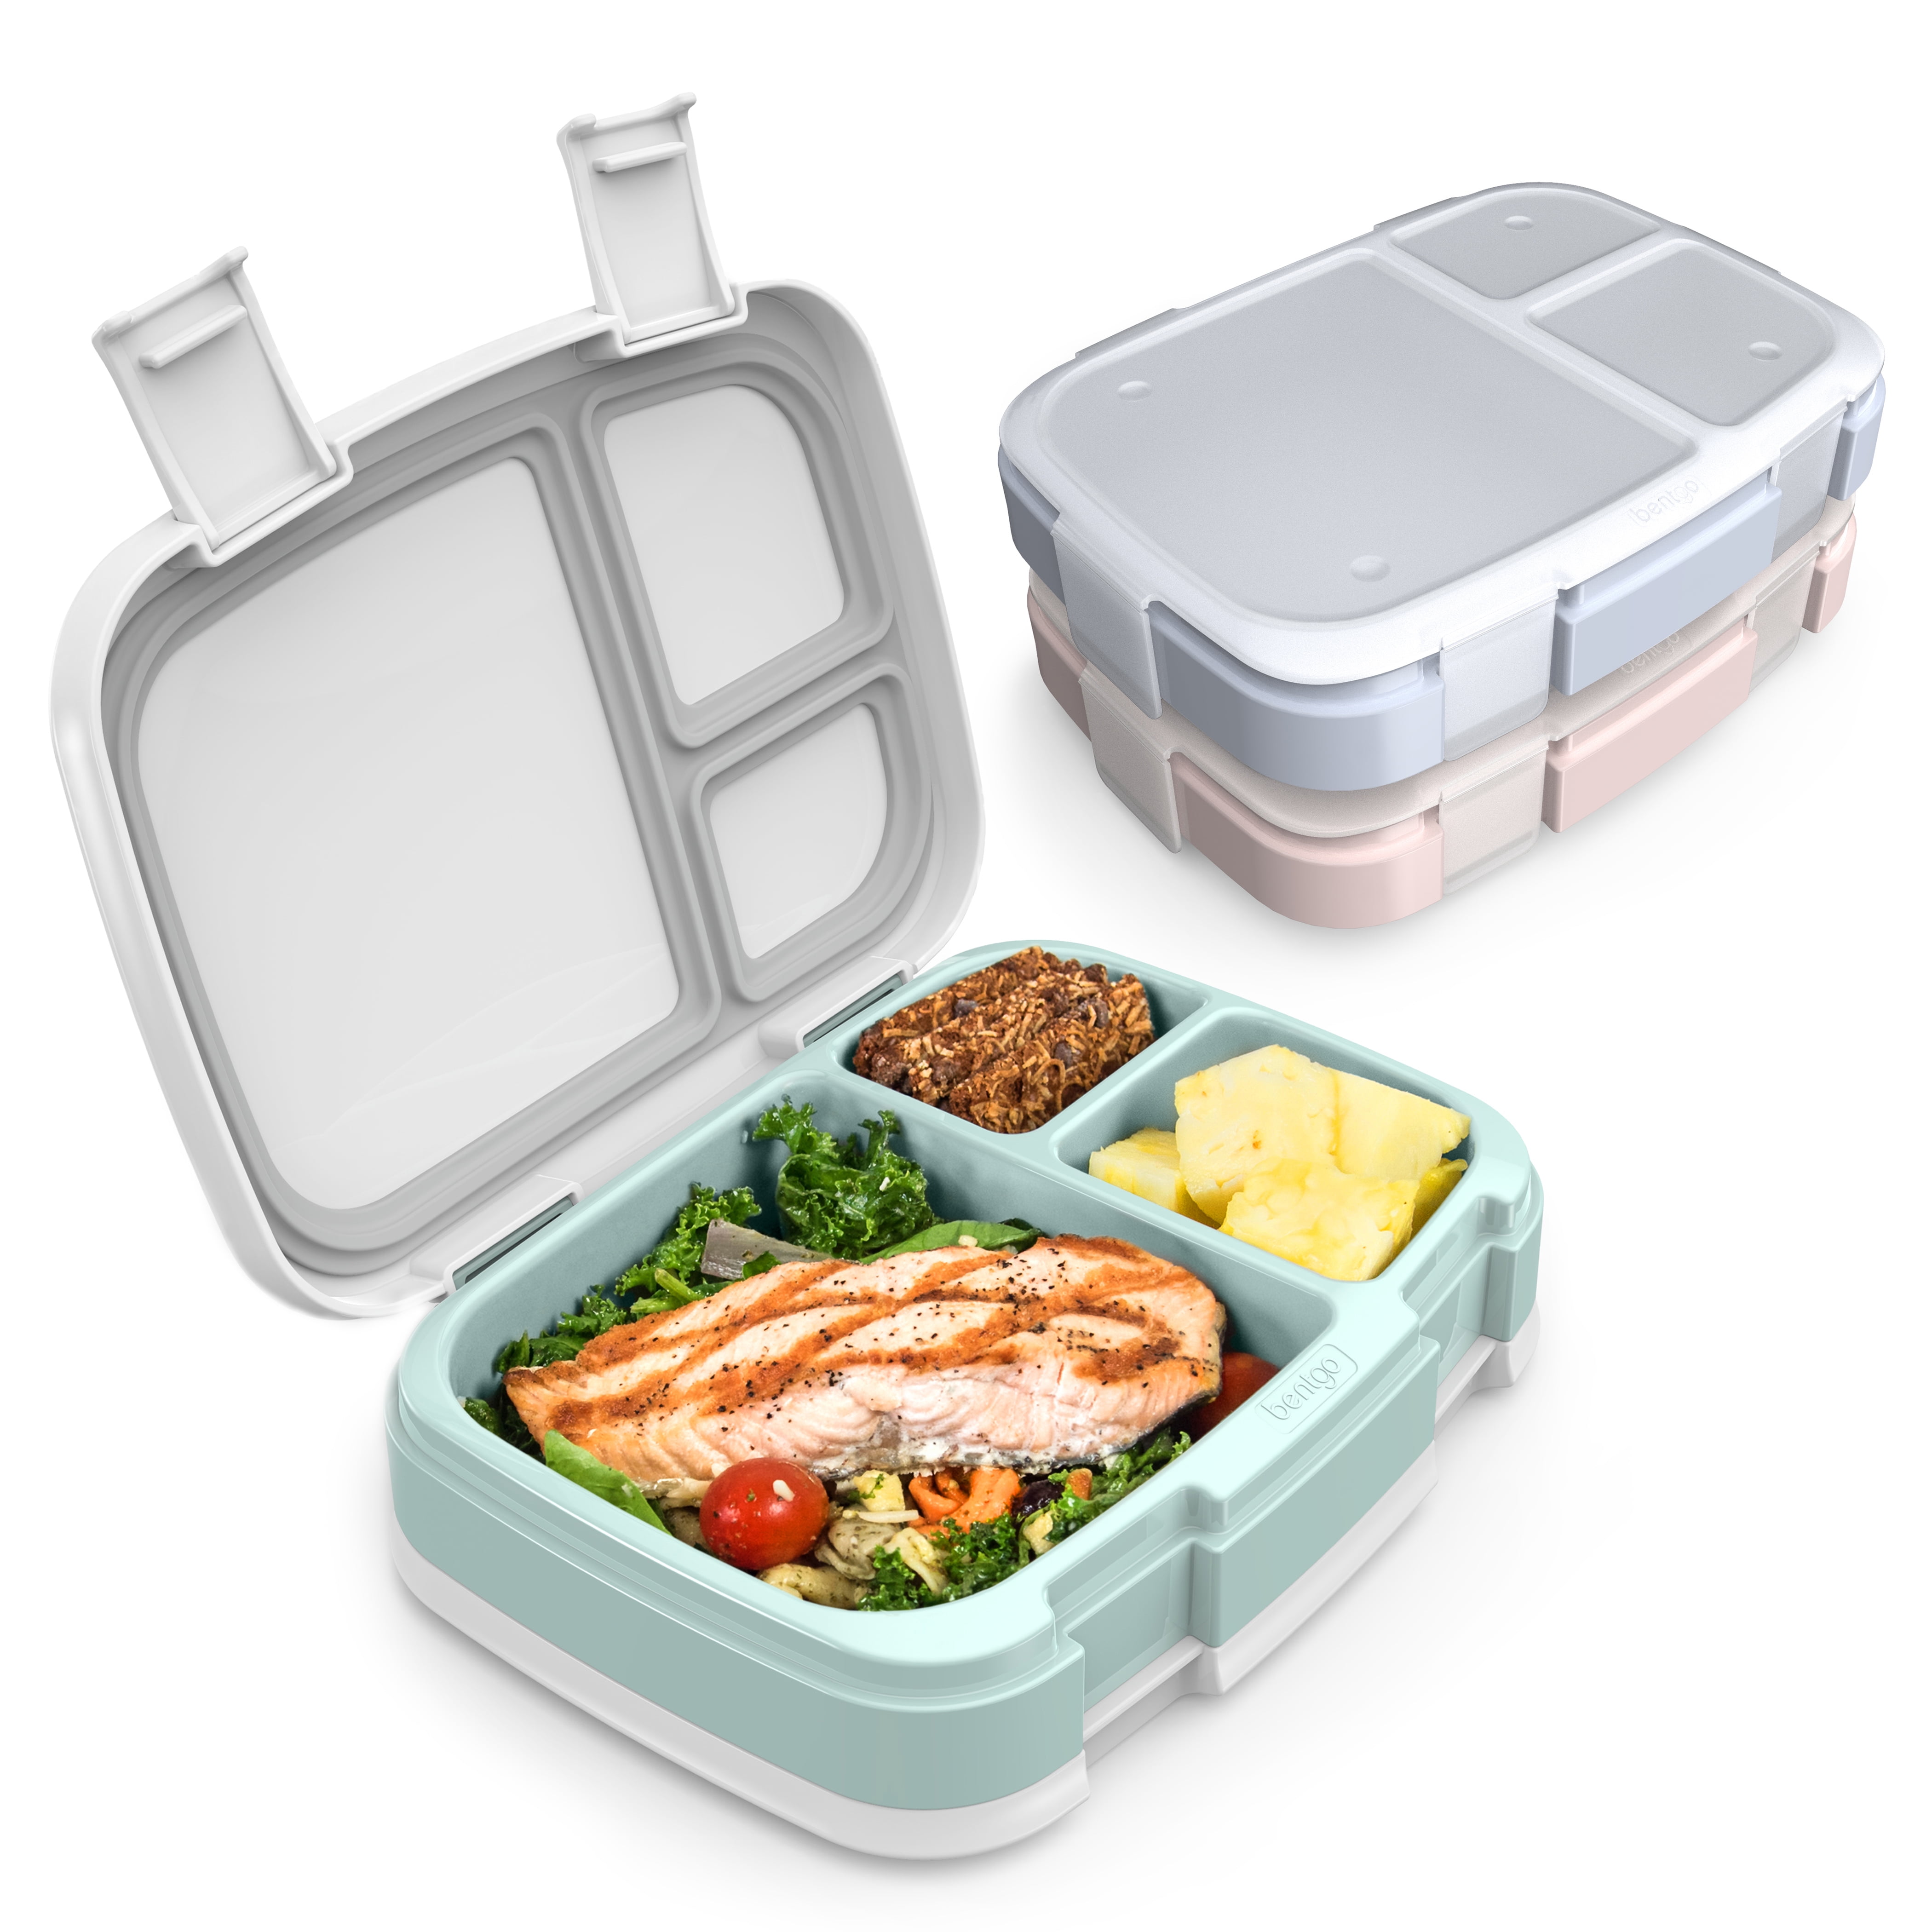 4-Compartment Meal Prep Container with Built-In Portion Control for Healthy At-Home Meals and On-the-Go Lunches Blue Reusable BPA-Free with Transparent Cover Bentgo Fresh Tray 